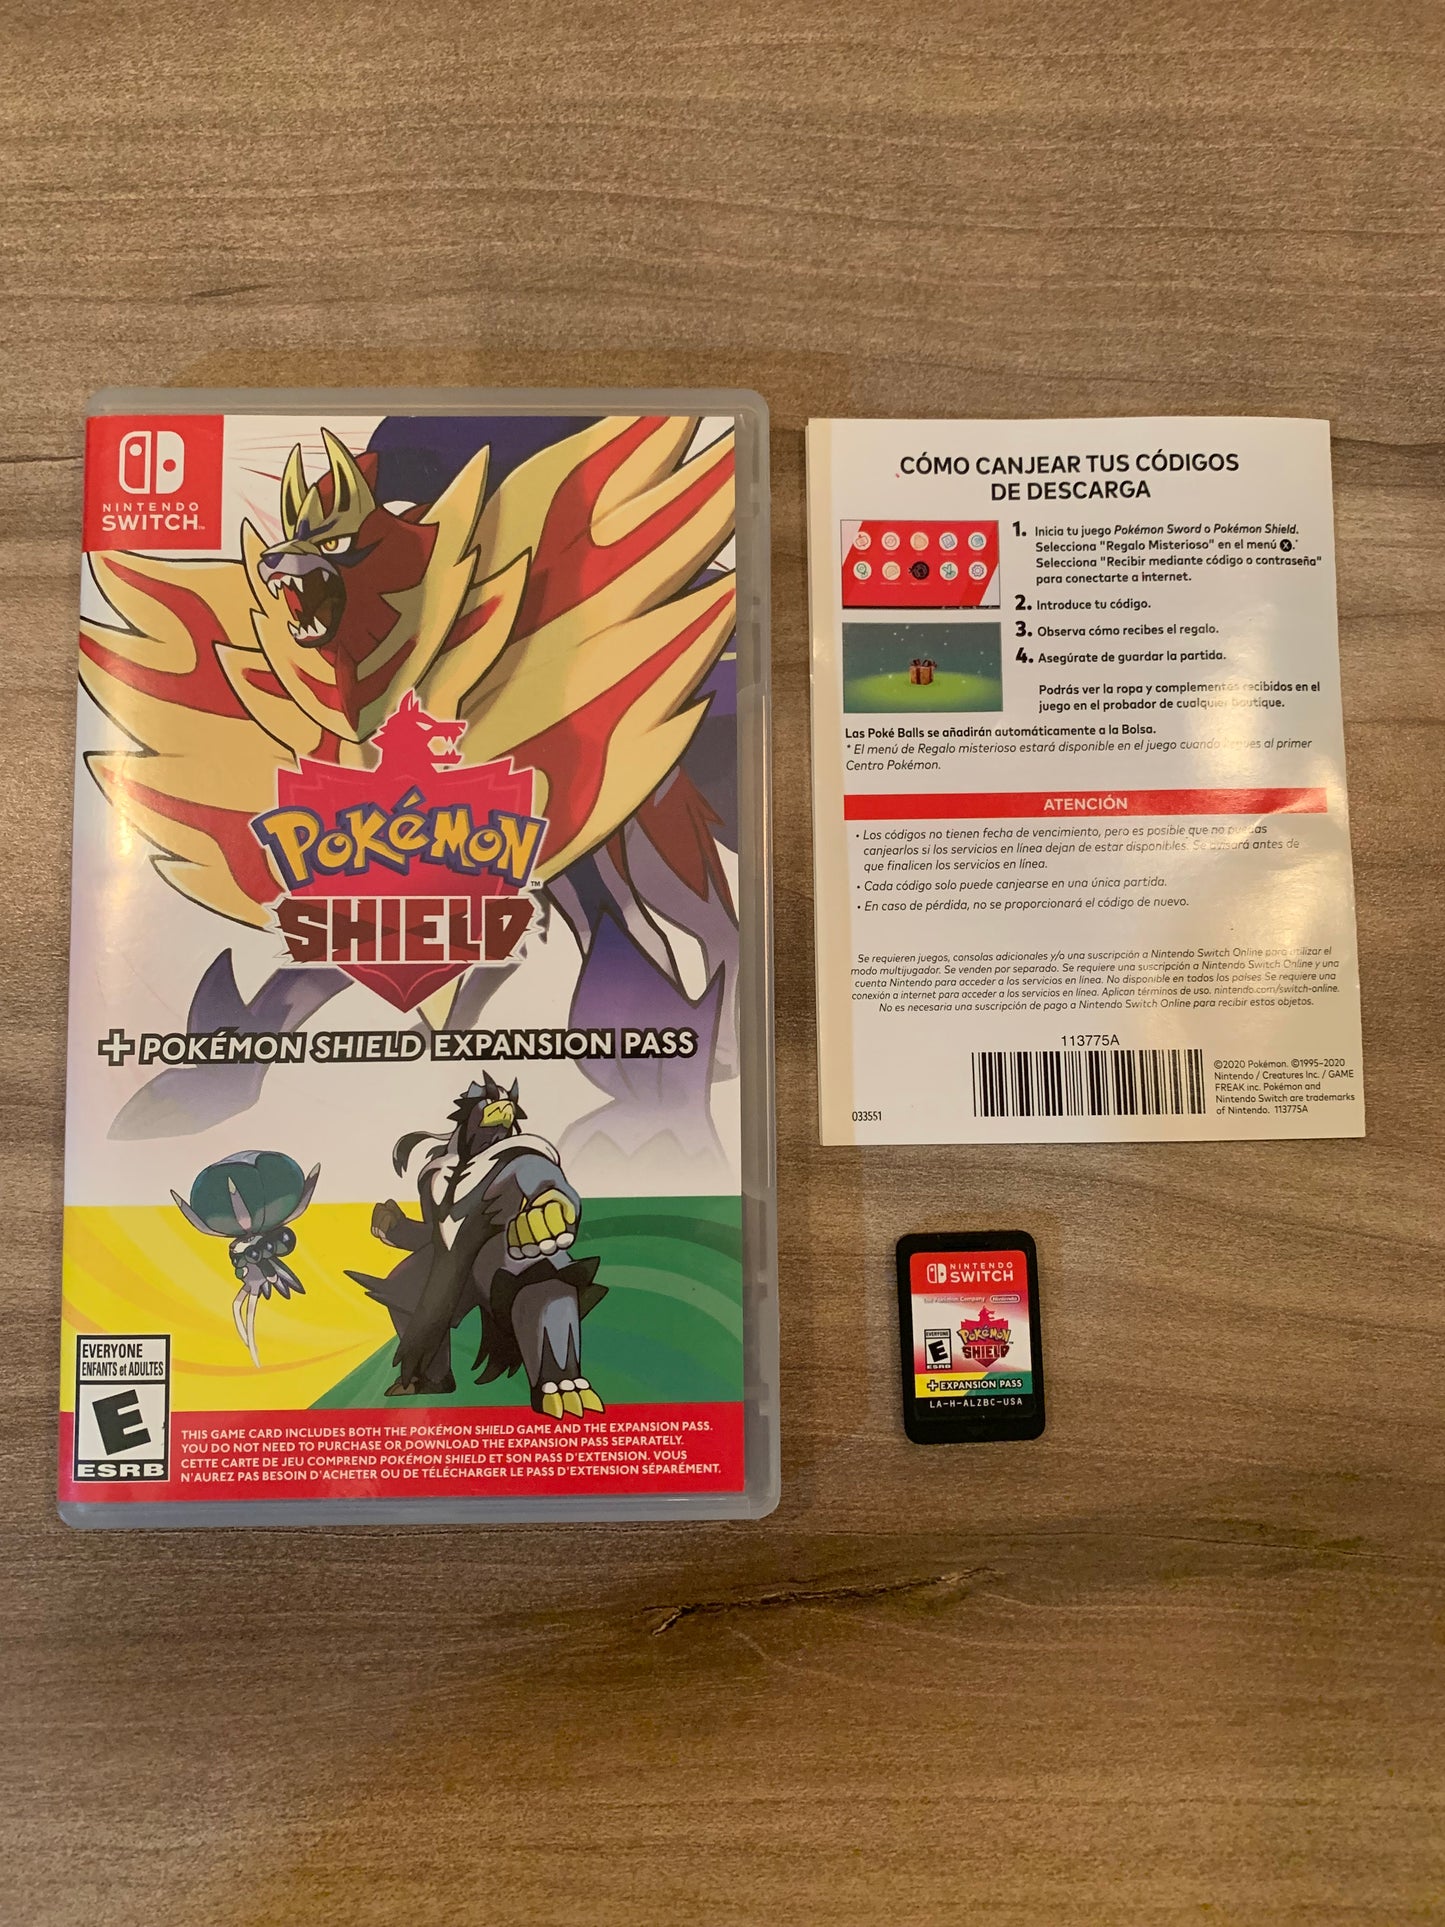 PiXEL-RETRO.COM : NINTENDO SWITCH NEW SEALED IN BOX COMPLETE MANUAL GAME NTSC POKEMON SHIELD + EXPANSION PASS